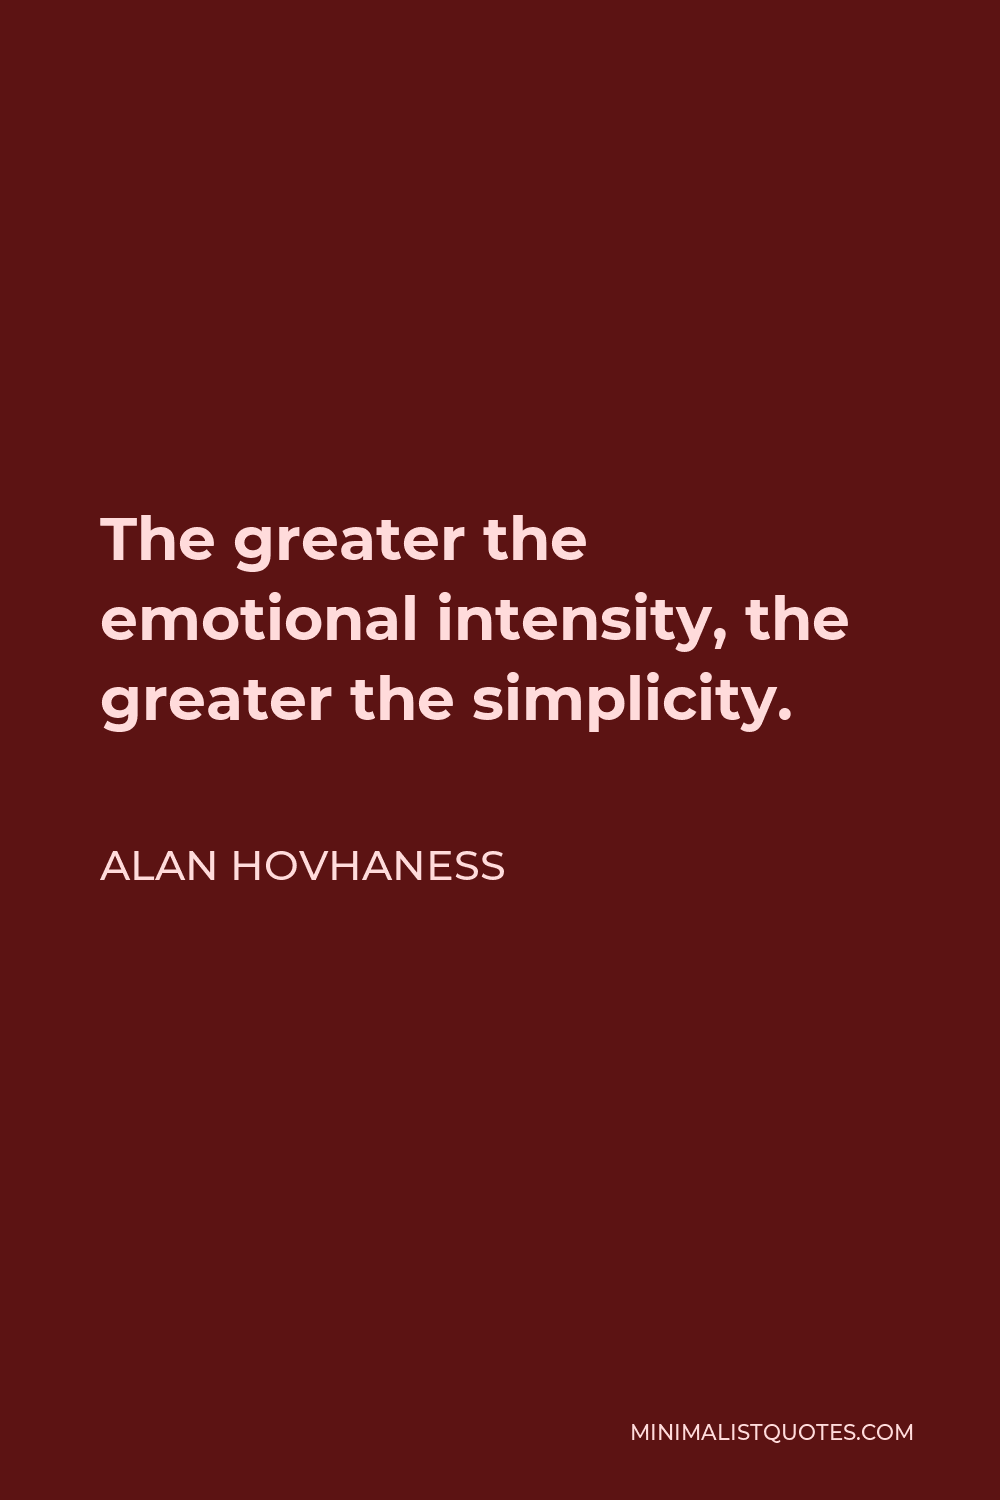 Alan Hovhaness Quote - The greater the emotional intensity, the greater the simplicity.